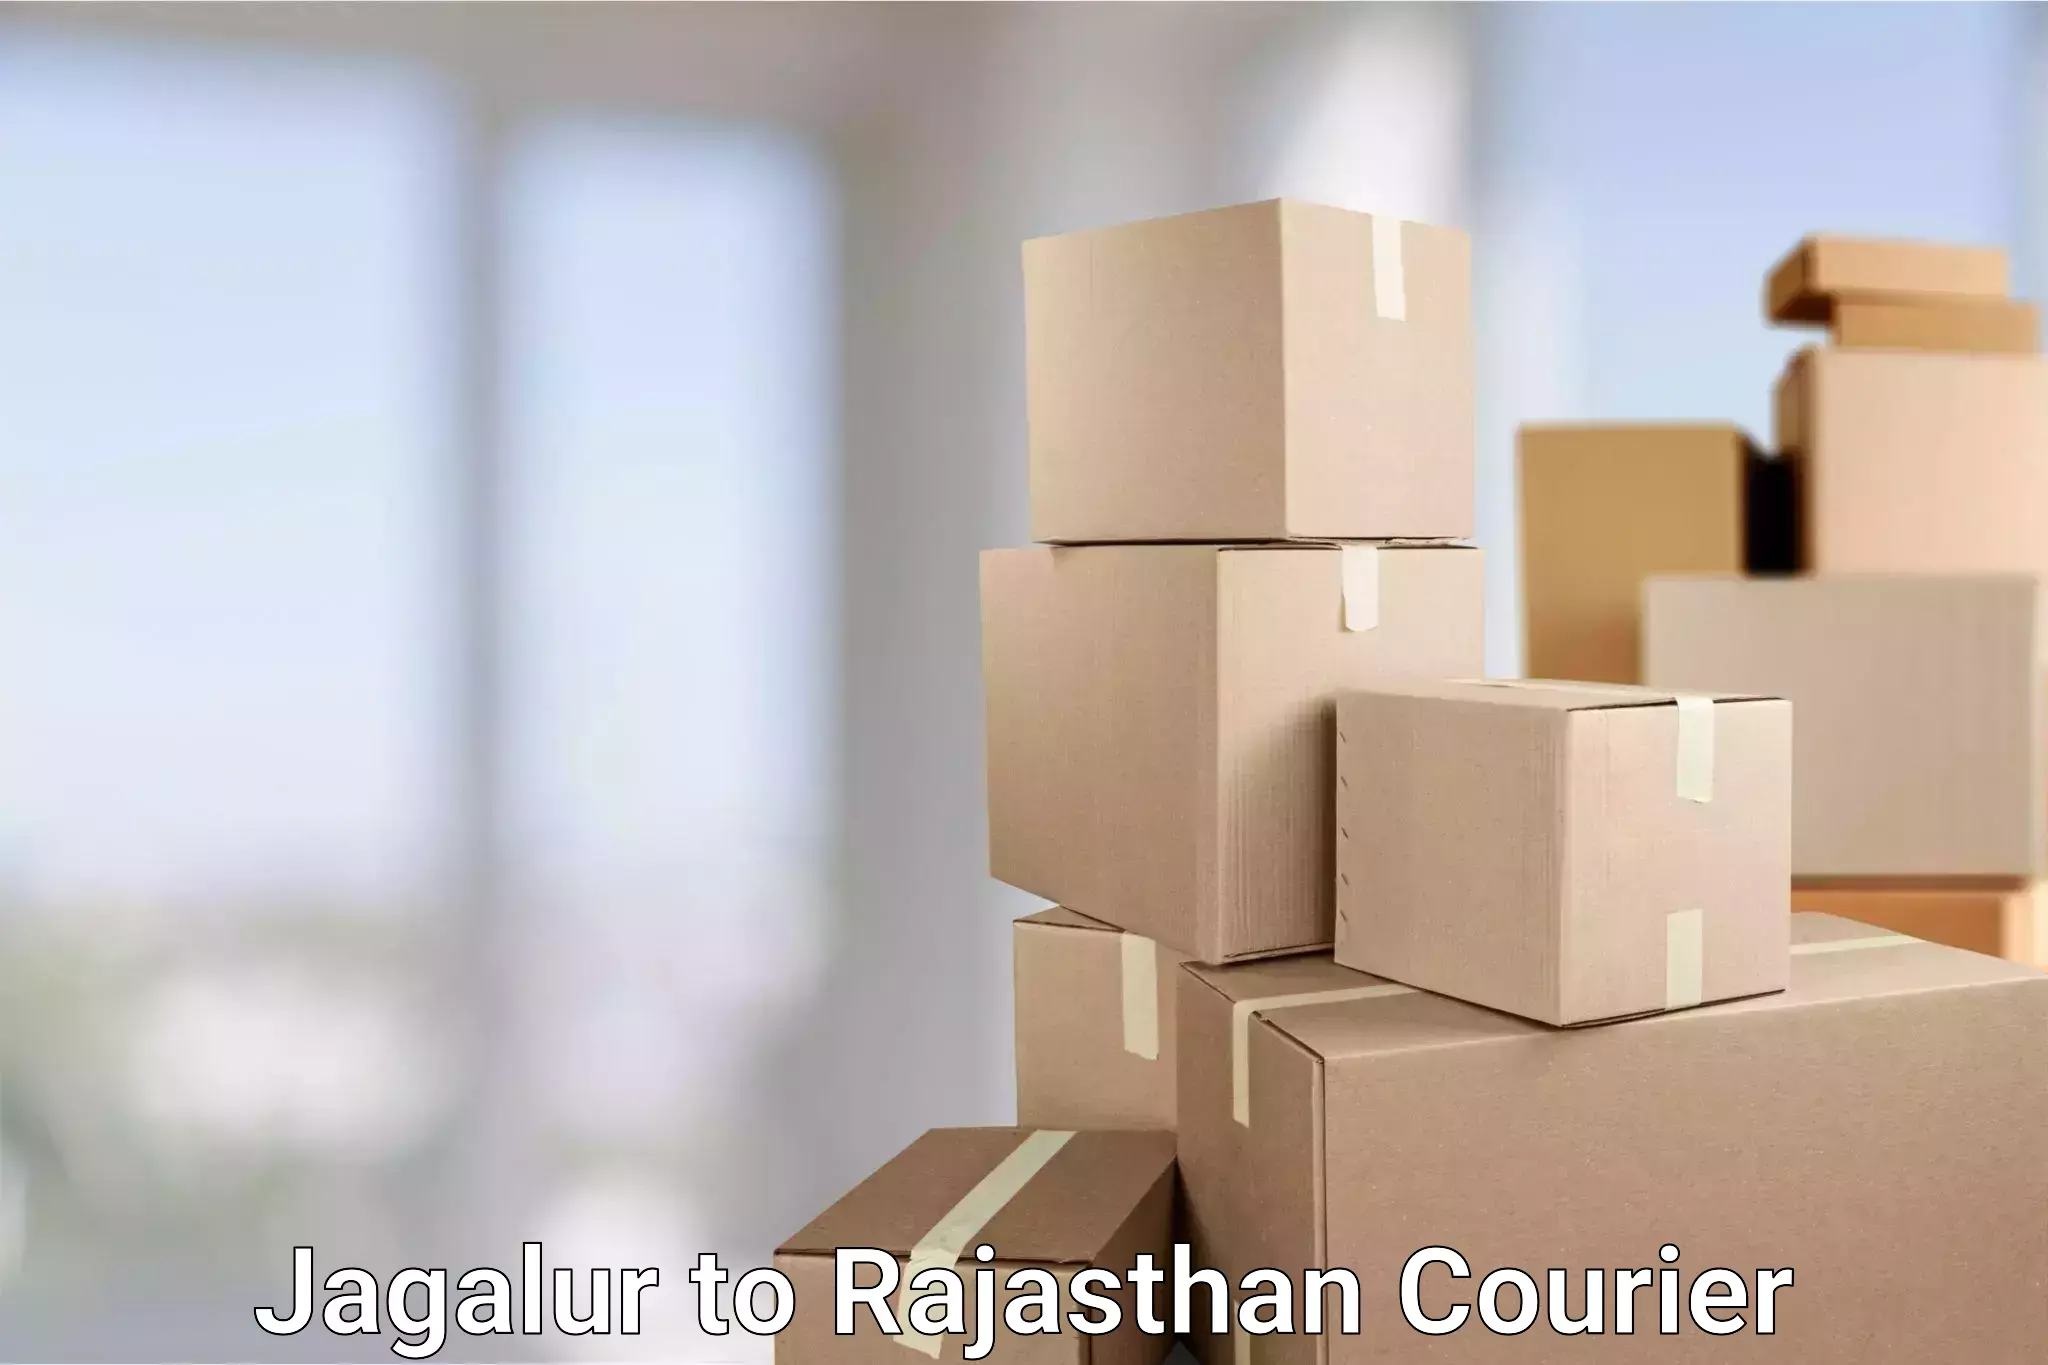 Next-day delivery options in Jagalur to Khanpur